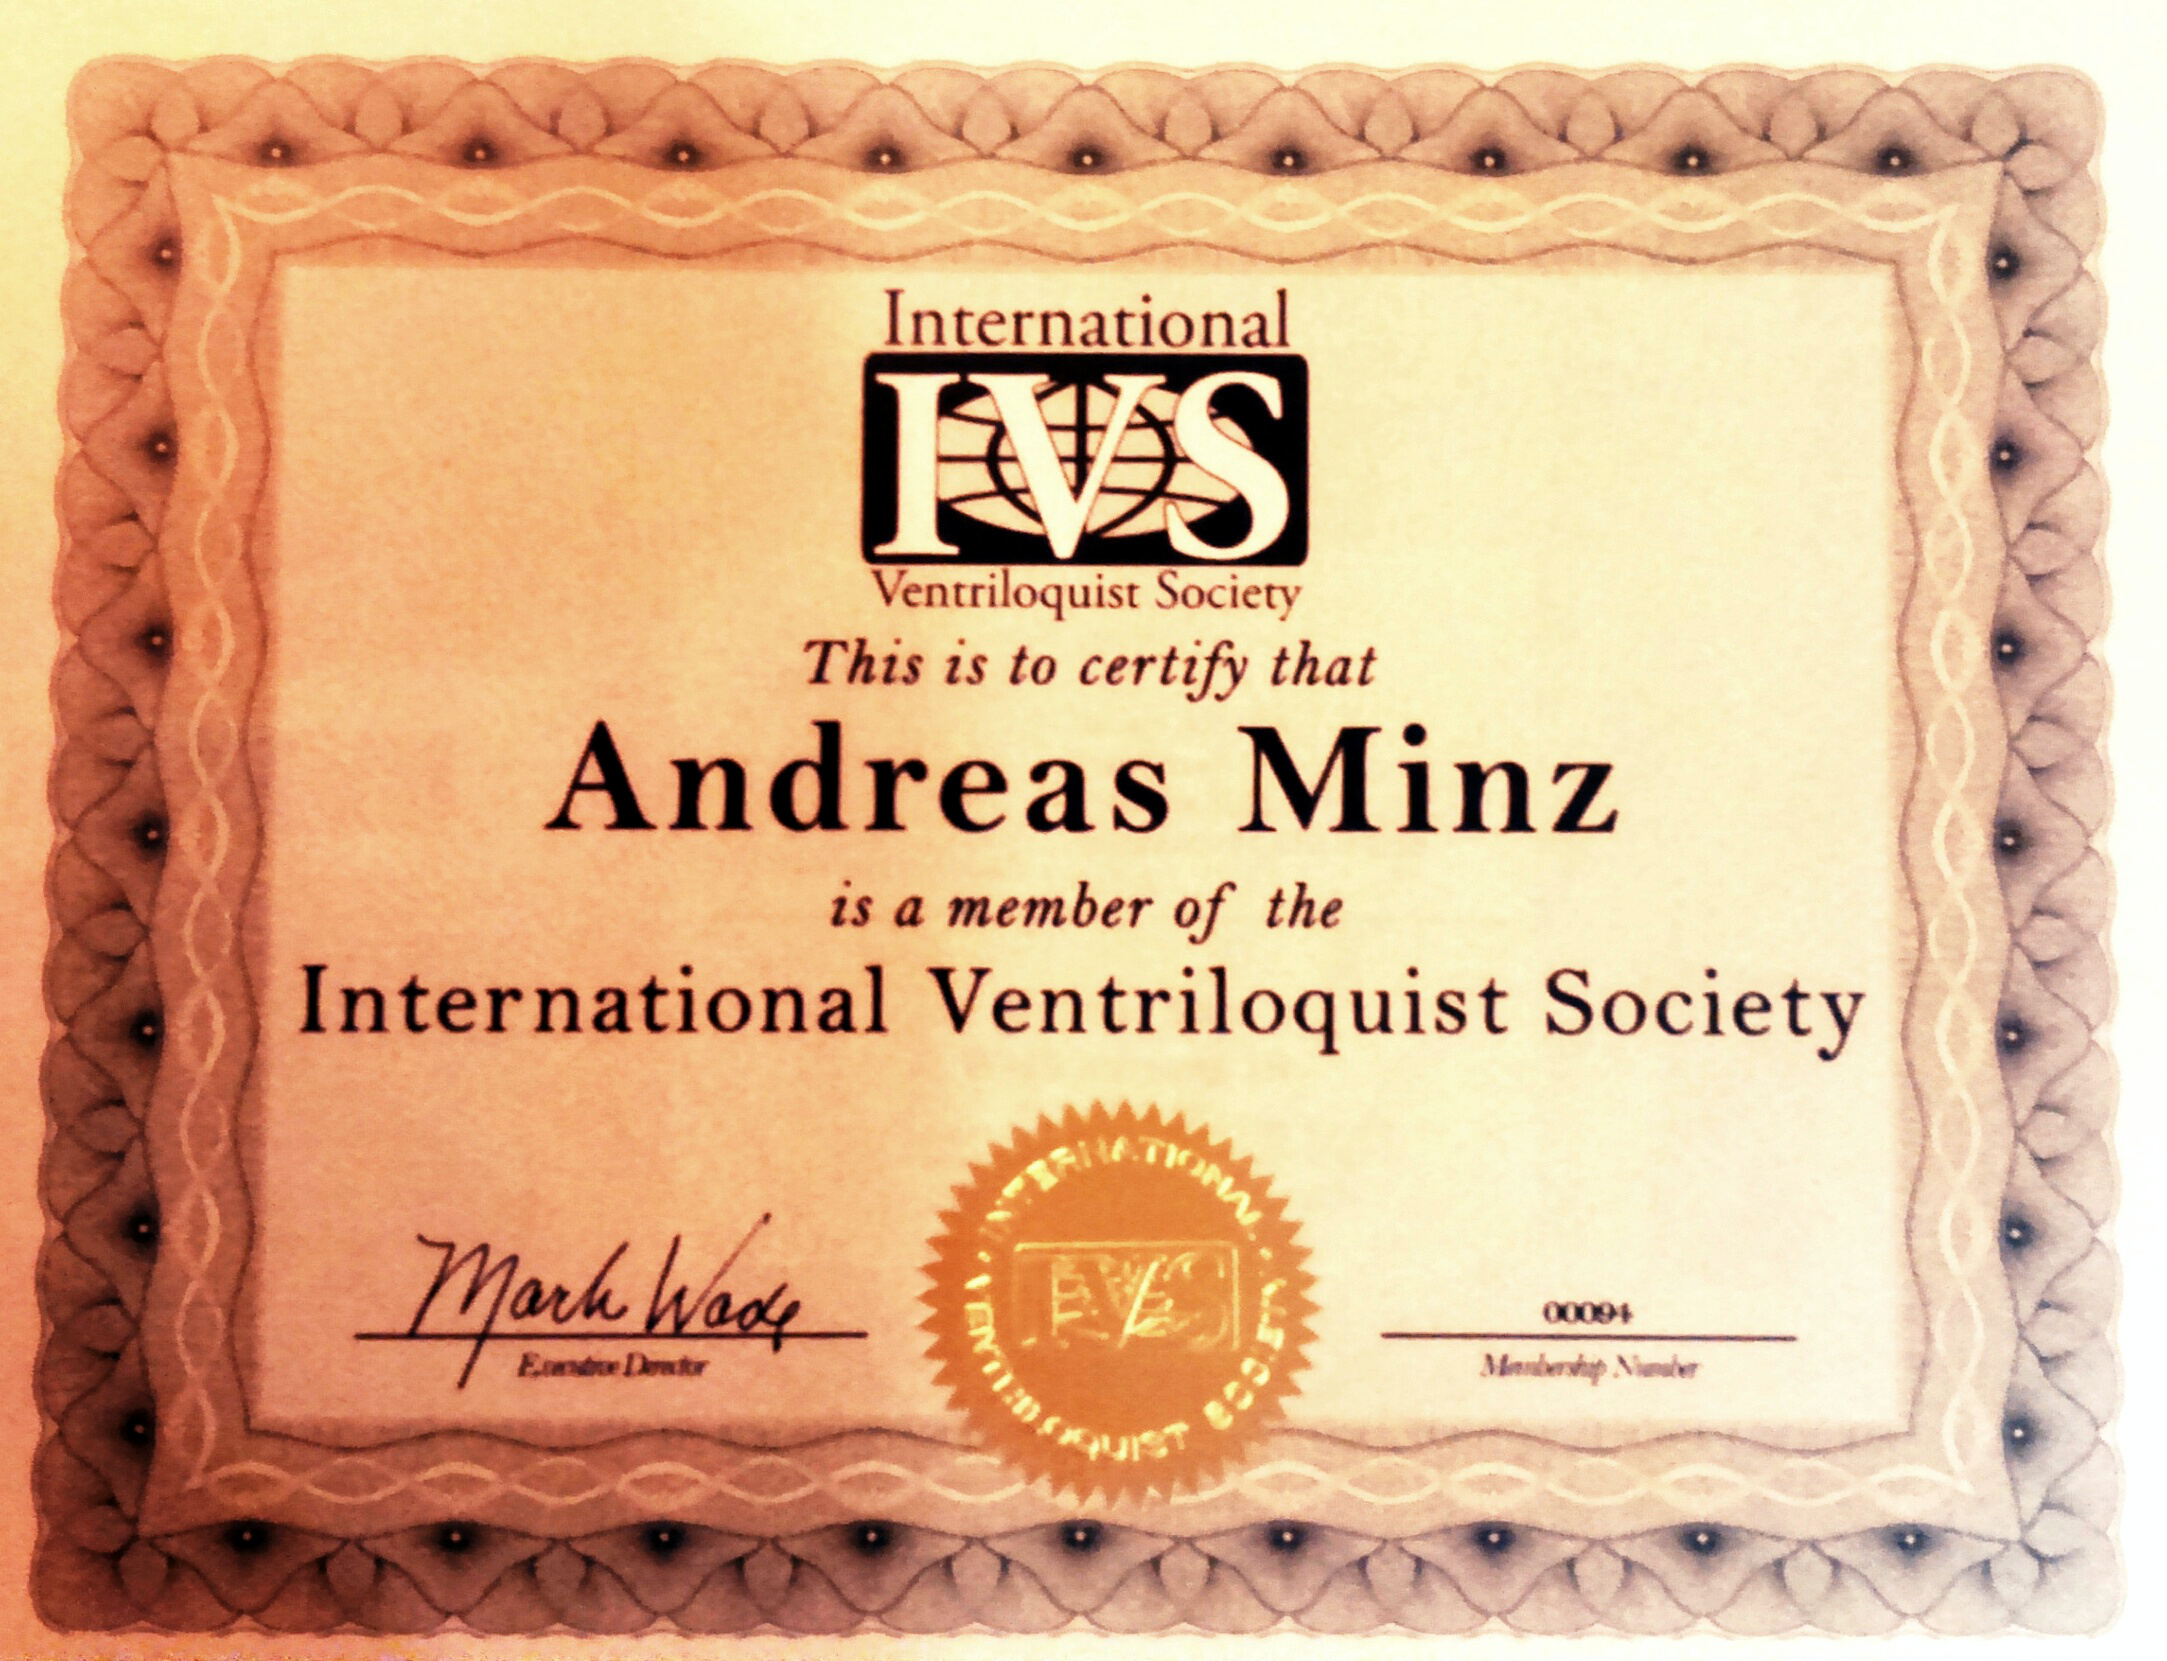 Minze is Member of the IVS - International Ventriloquist Society